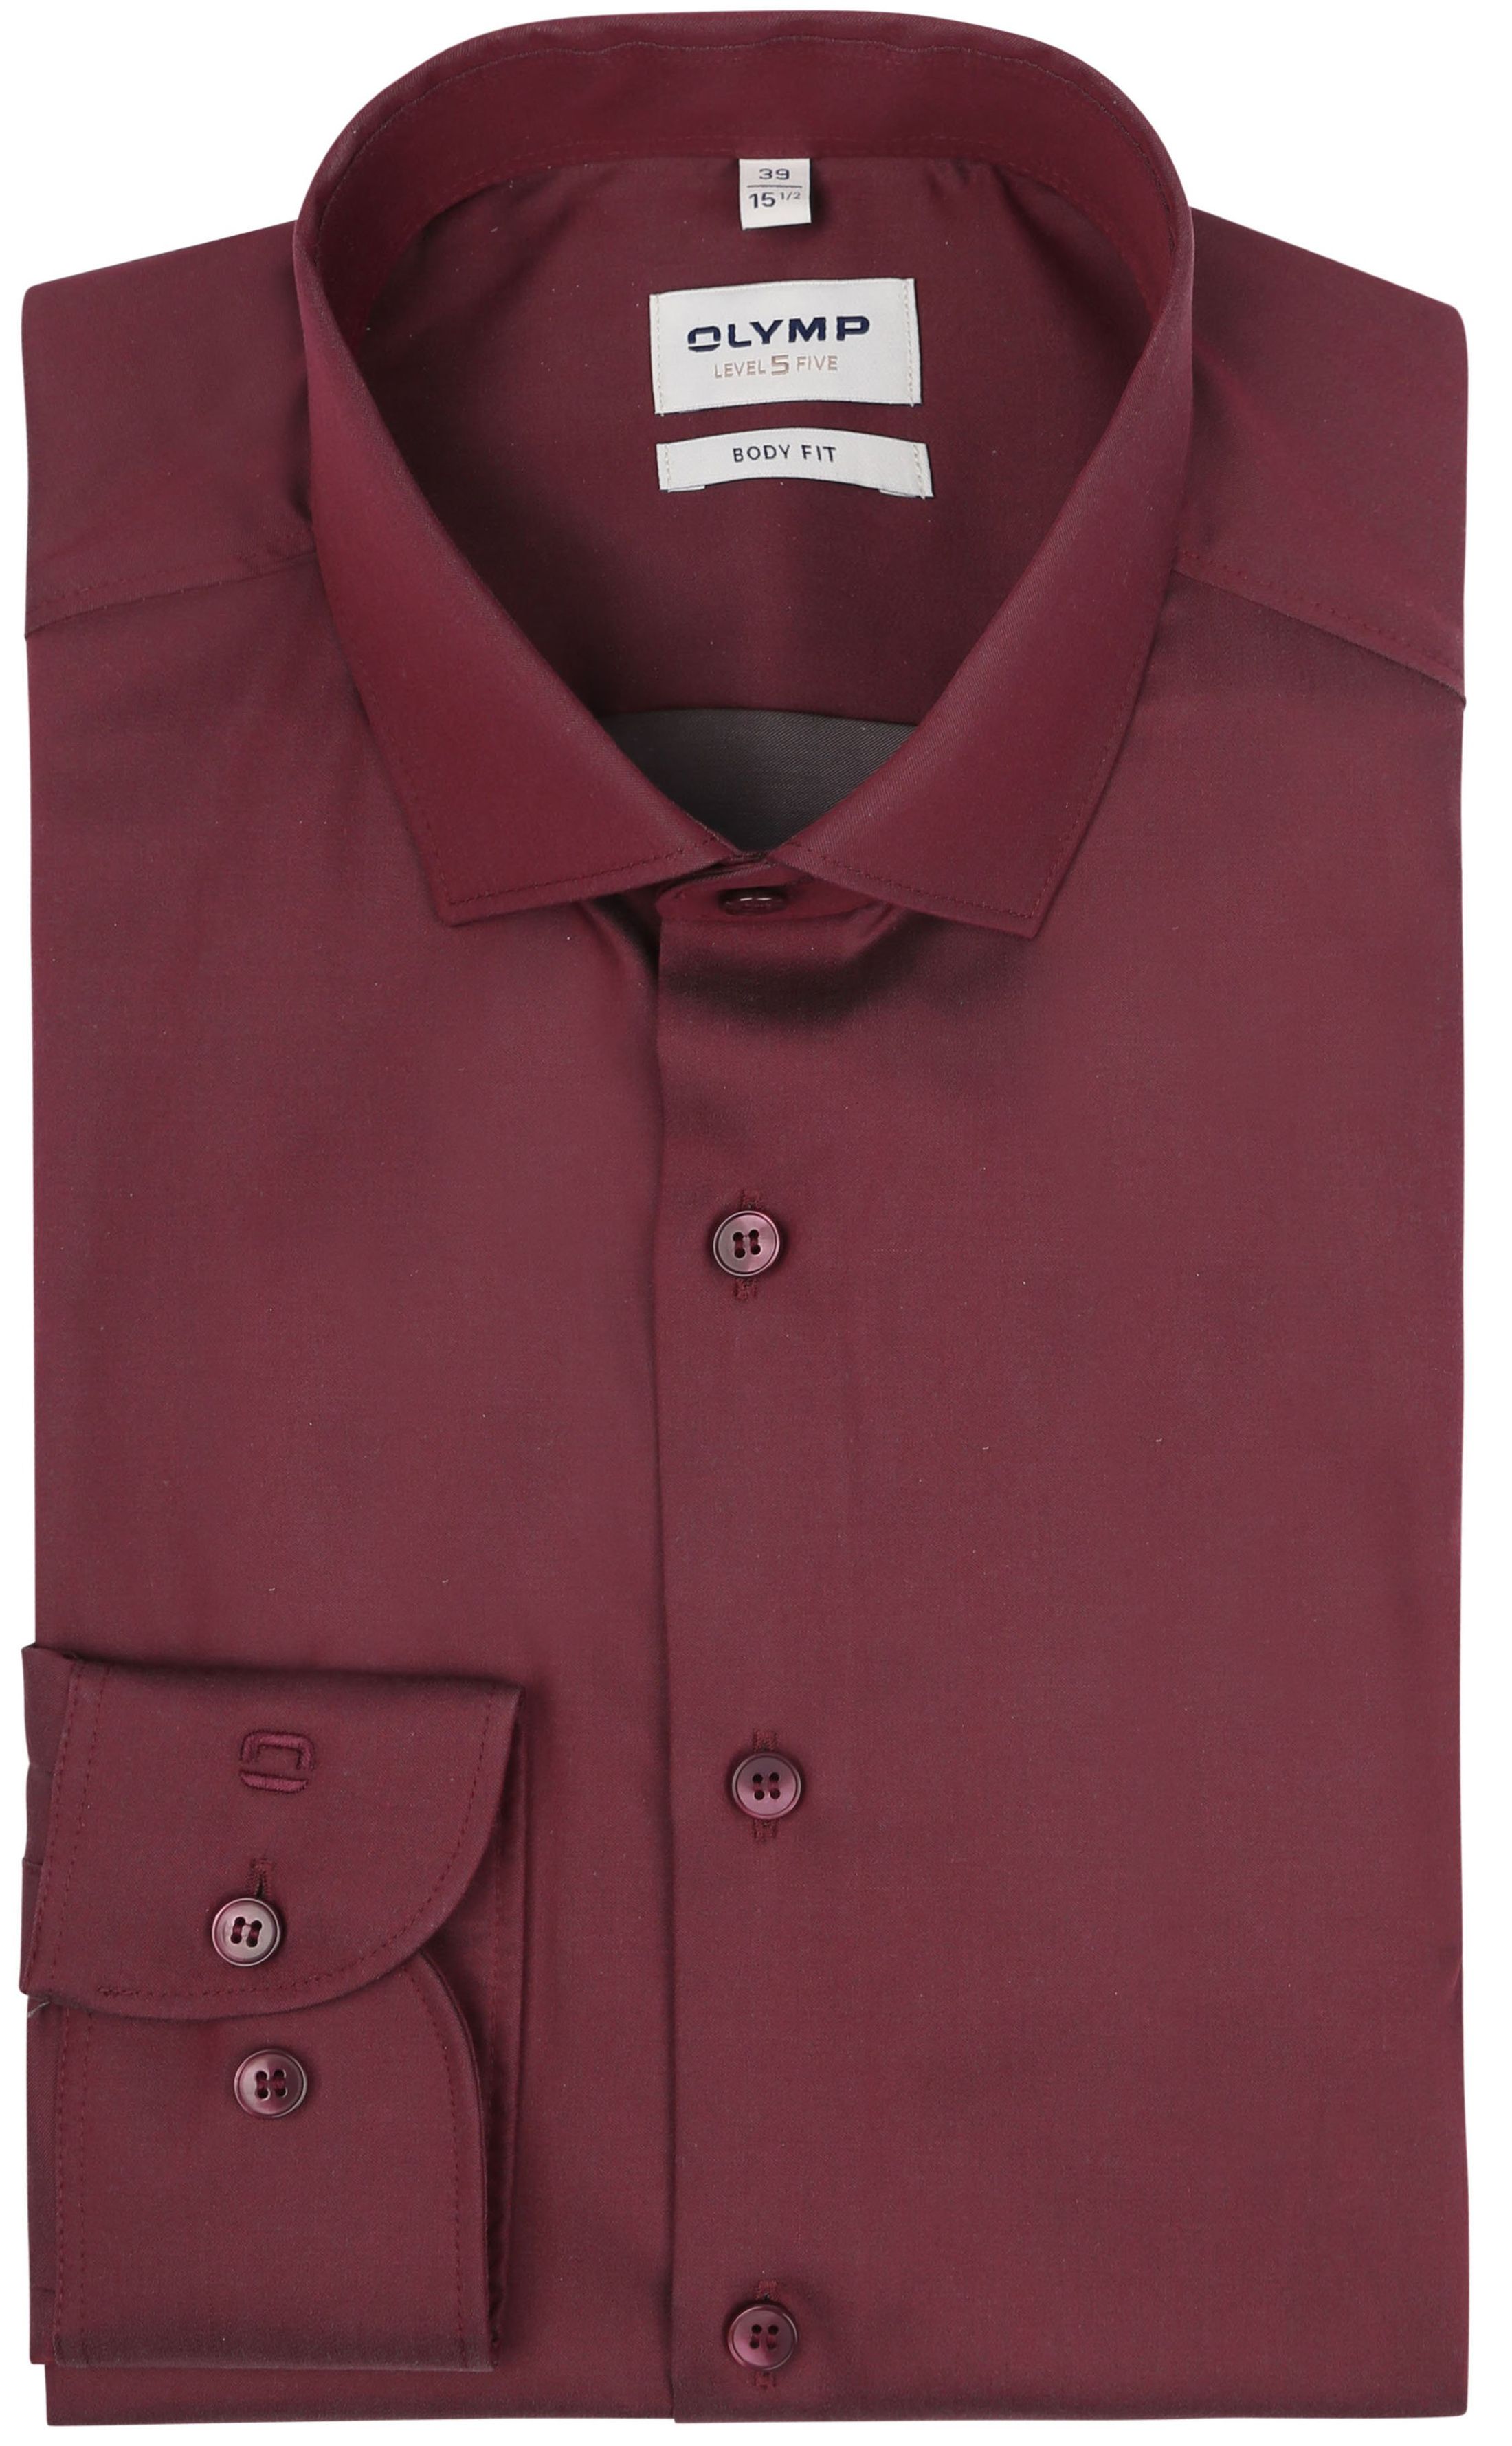 OLYMP Shirt Level 5 Bordeaux Red Burgundy size 42 product